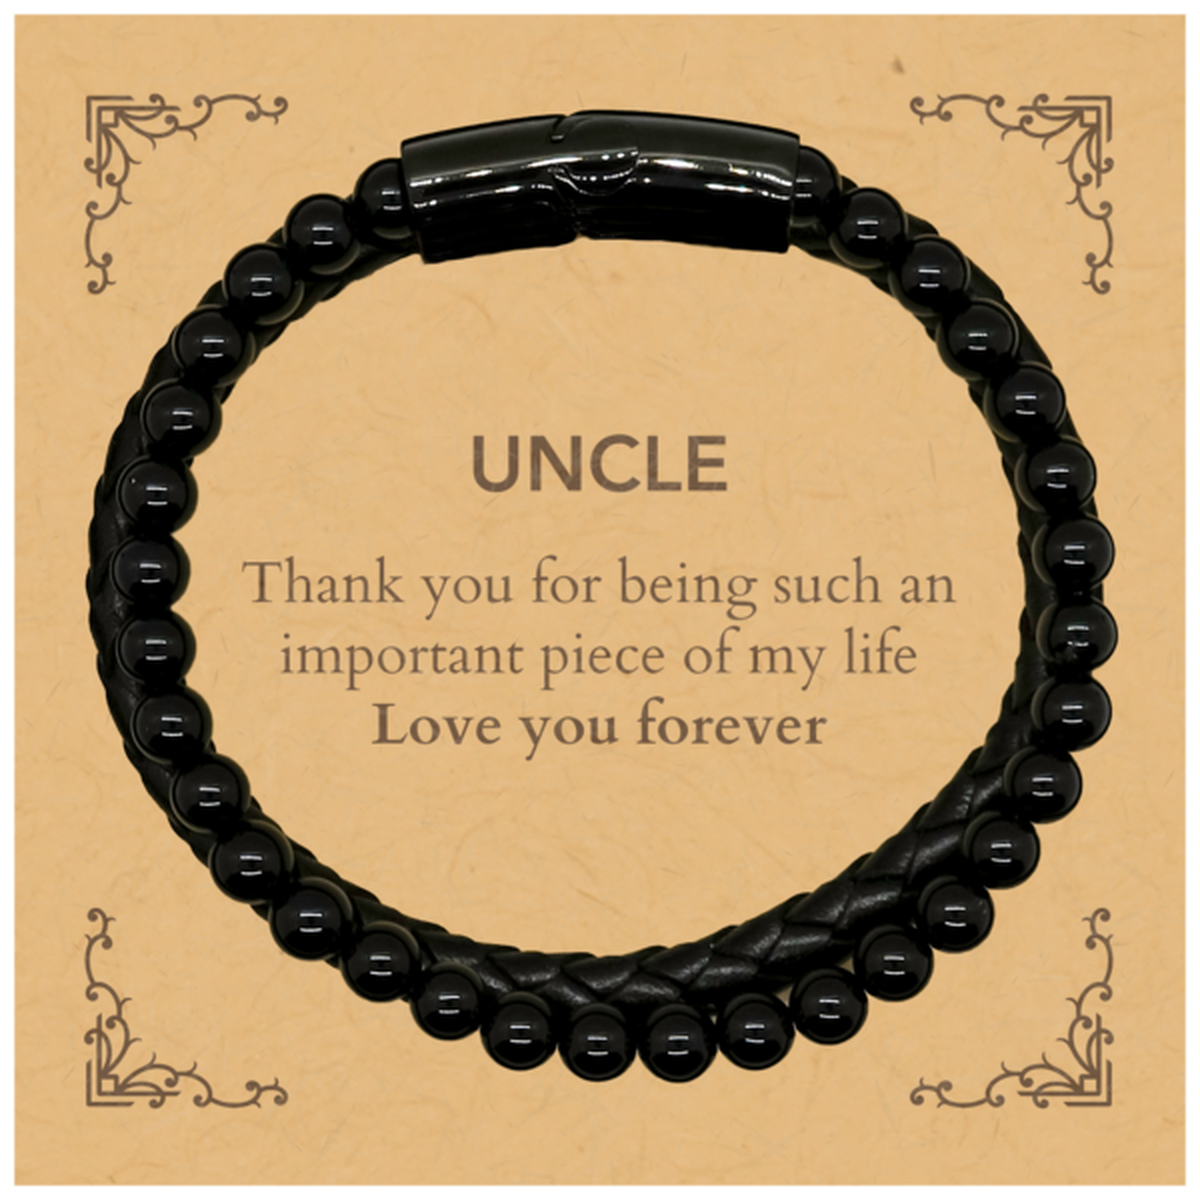 Appropriate Uncle Stone Leather Bracelets Epic Birthday Gifts for Uncle Thank you for being such an important piece of my life Uncle Christmas Mothers Fathers Day